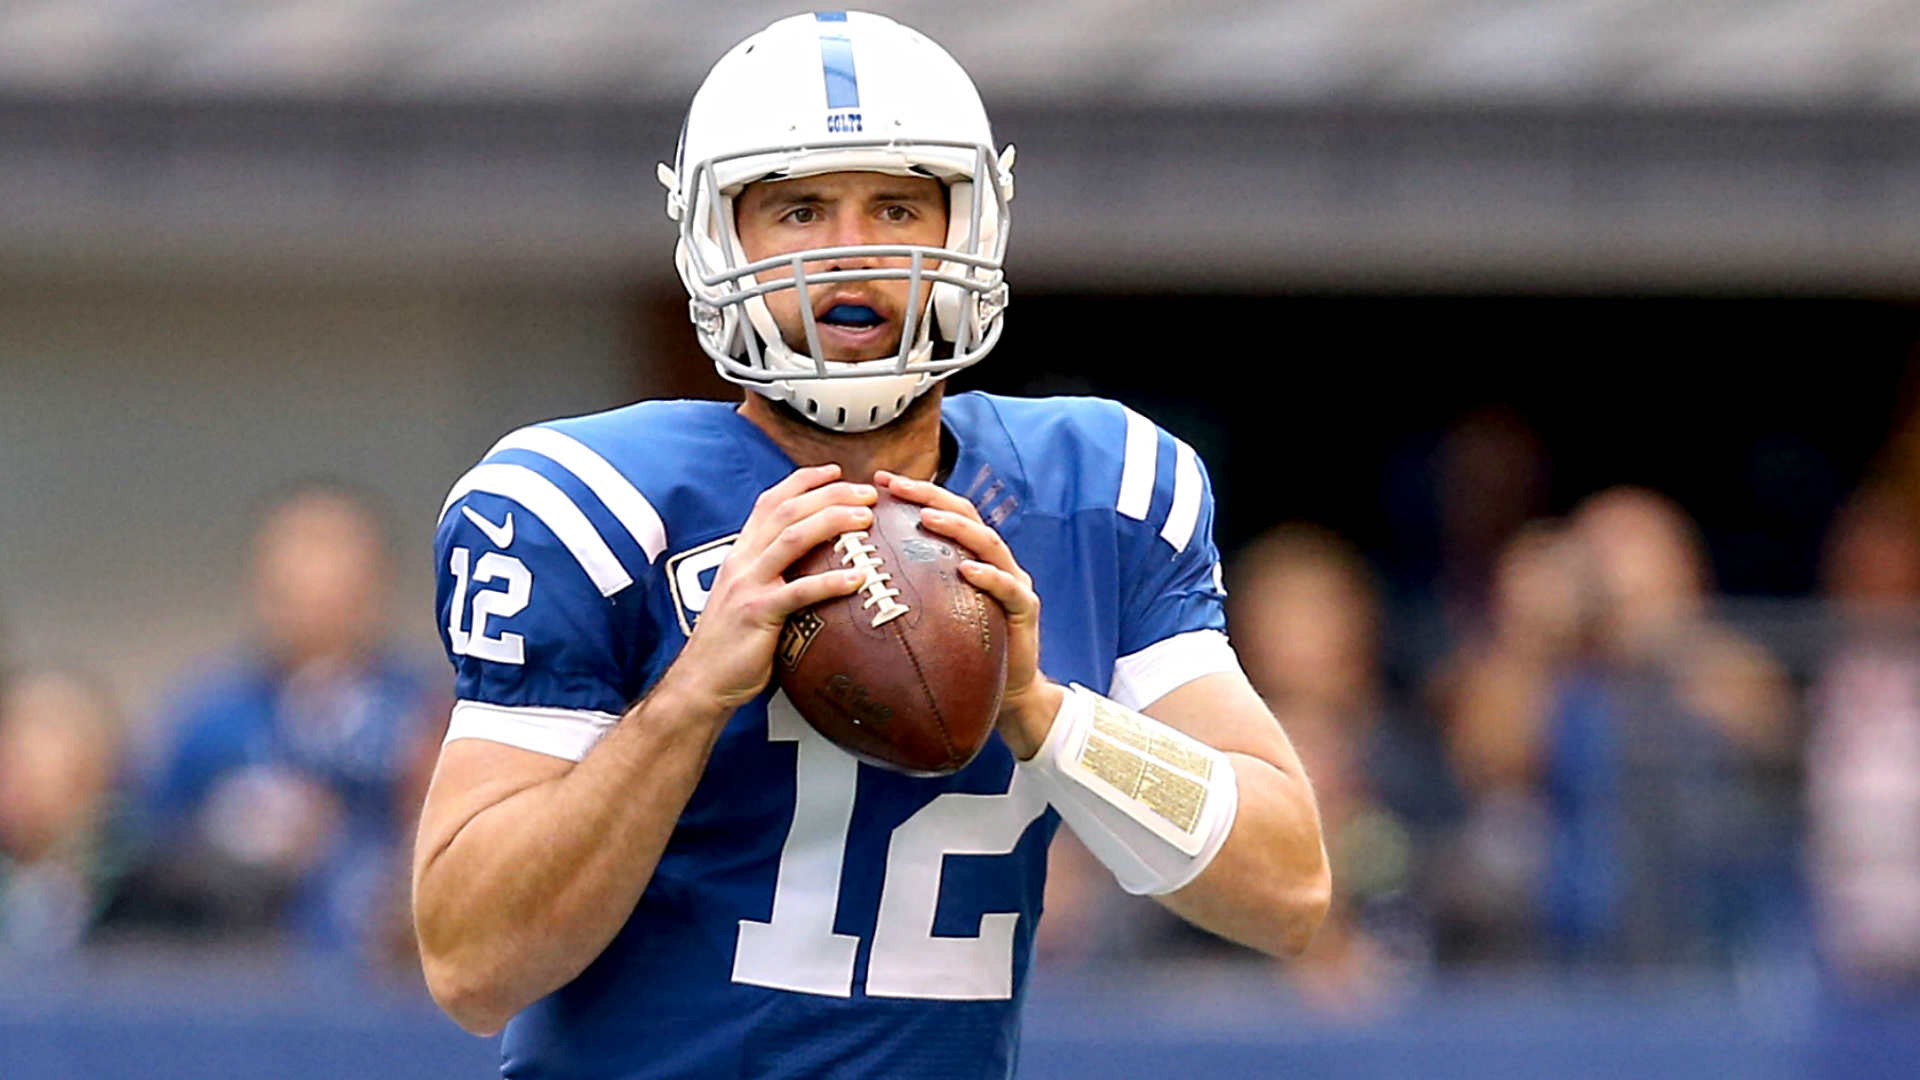 Andrew Luck (US News/Getty Images)